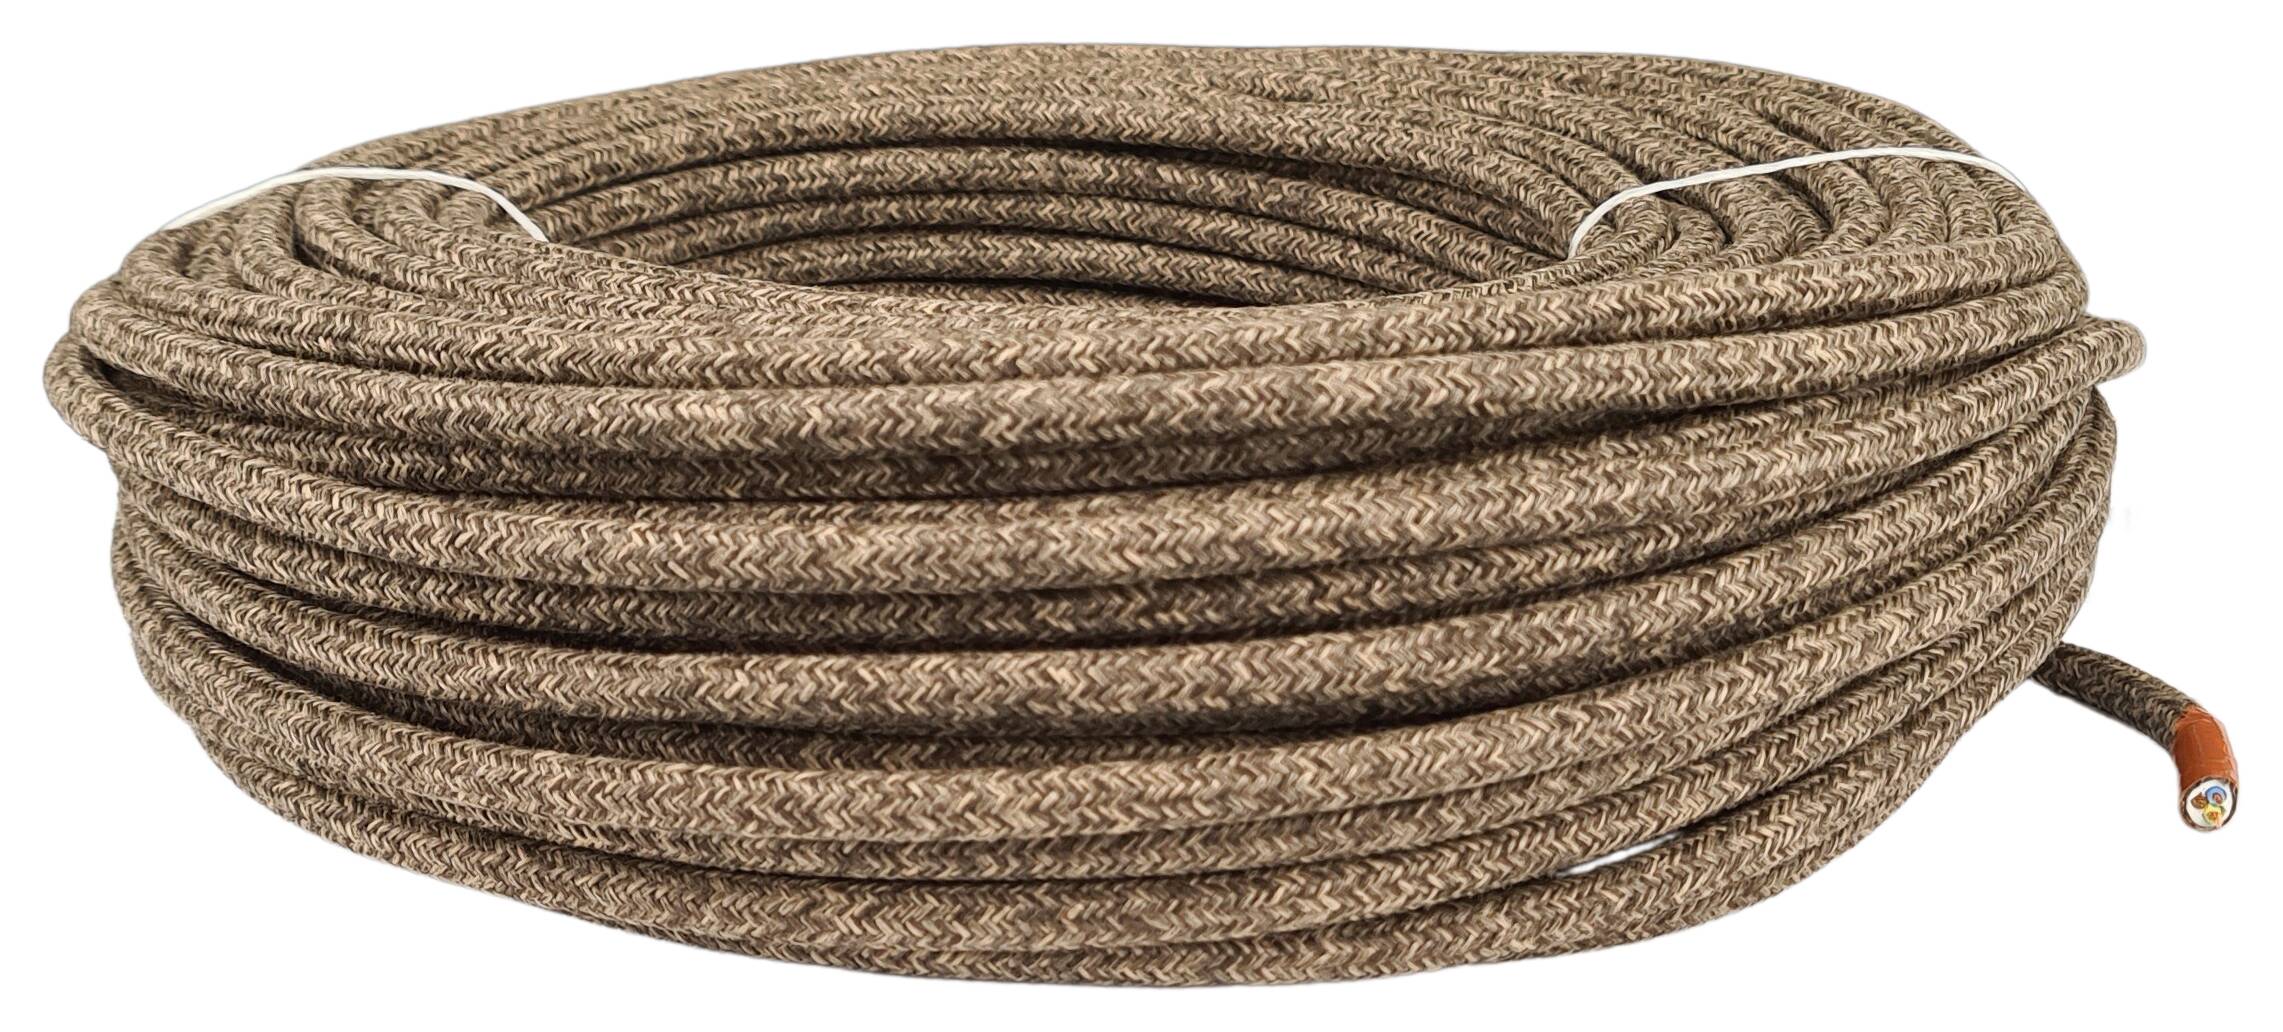 cable 3G 0,75 H03VV-F textile braided flecked lightbrown-darkbrown